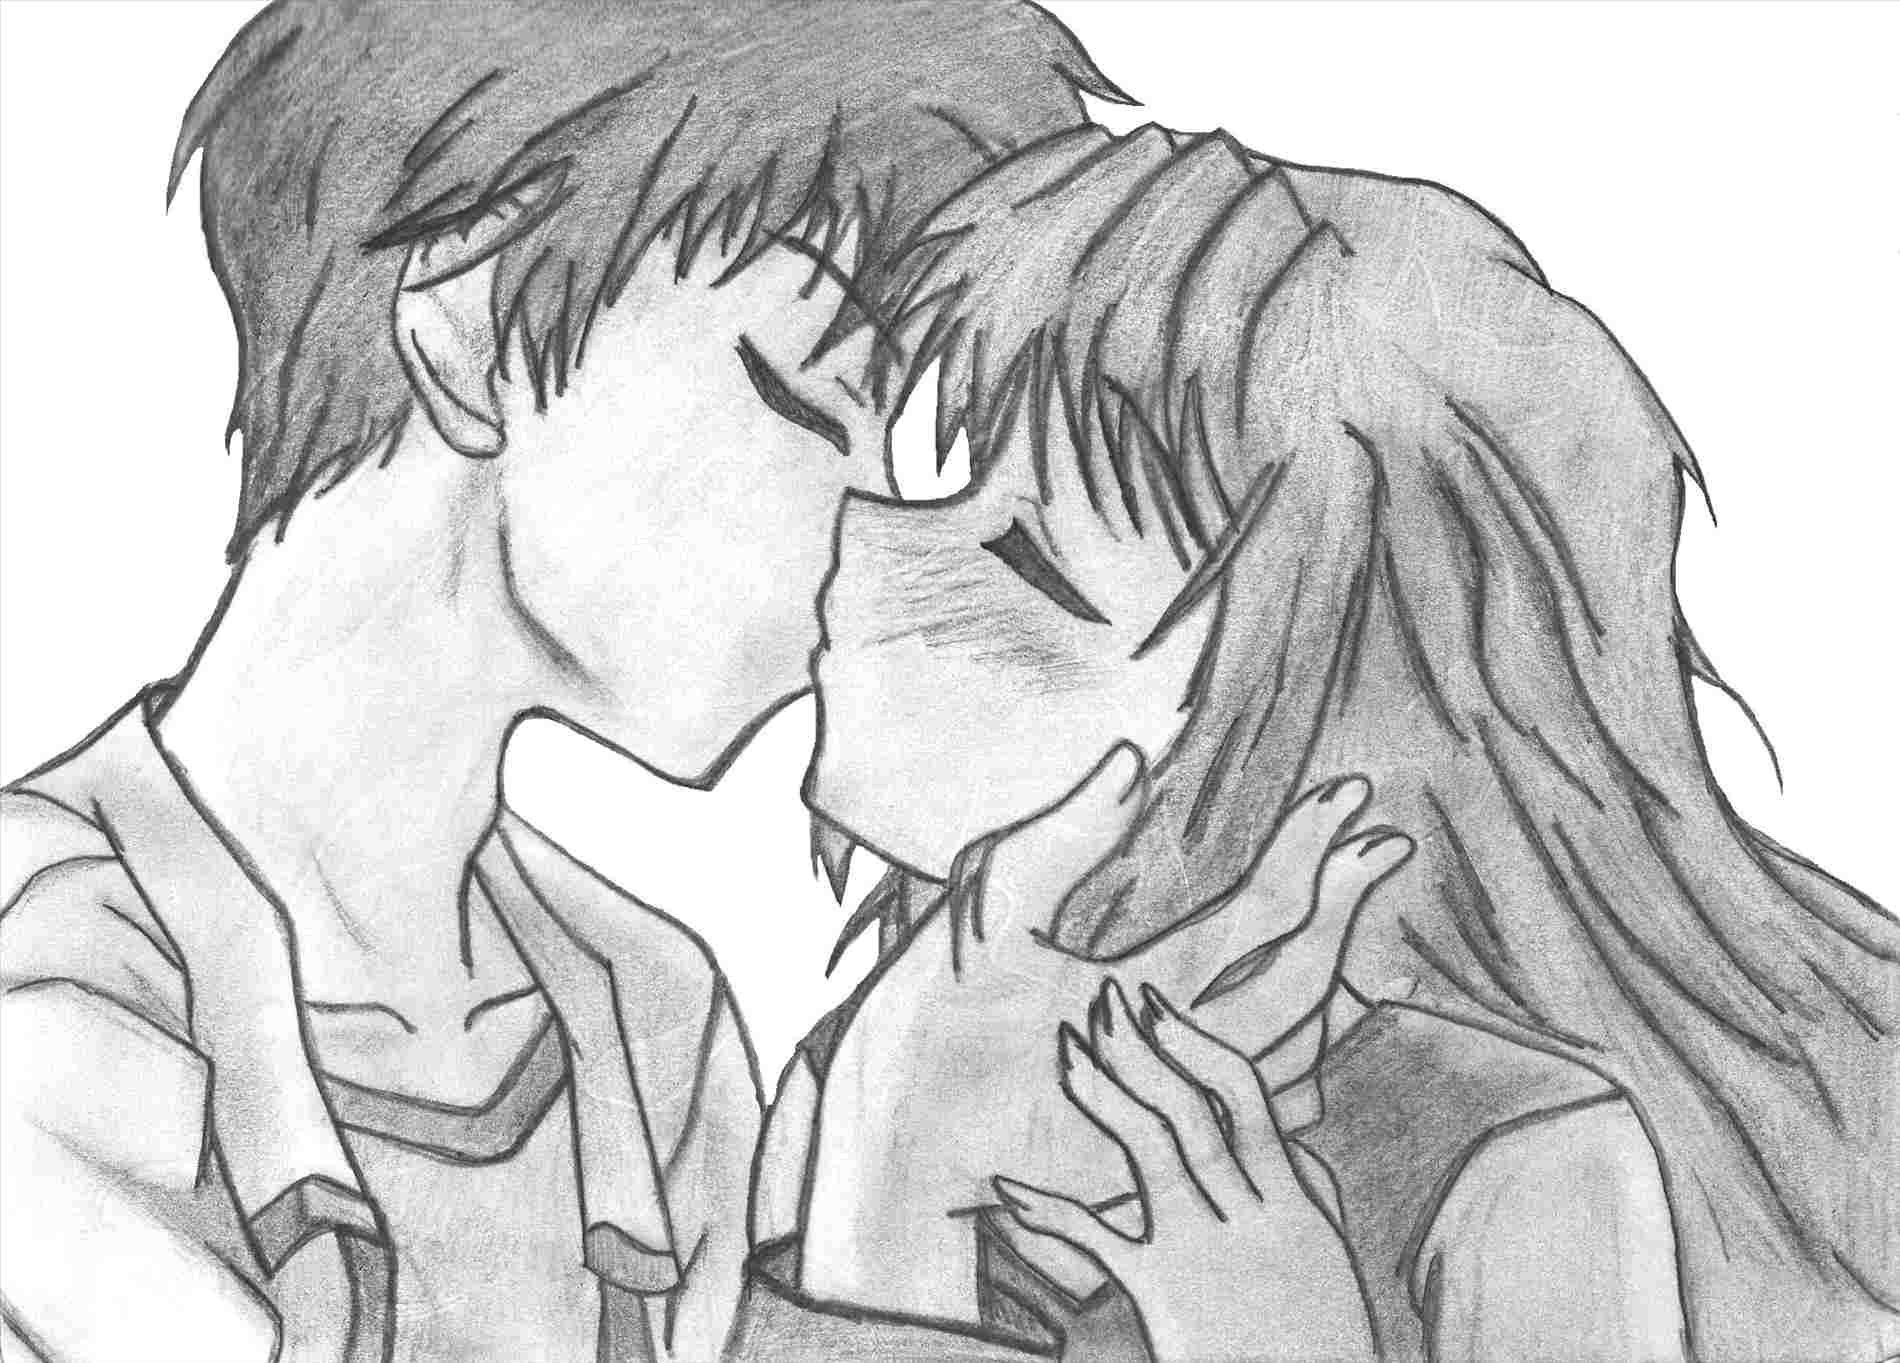 kiss anime boy and girl kissing drawing easy couple hd wallpaper art in pinterest rhpinterestcom ideas gdpictureusrhgdpictureus ideas anime boy and girl kissing drawing easy jpg